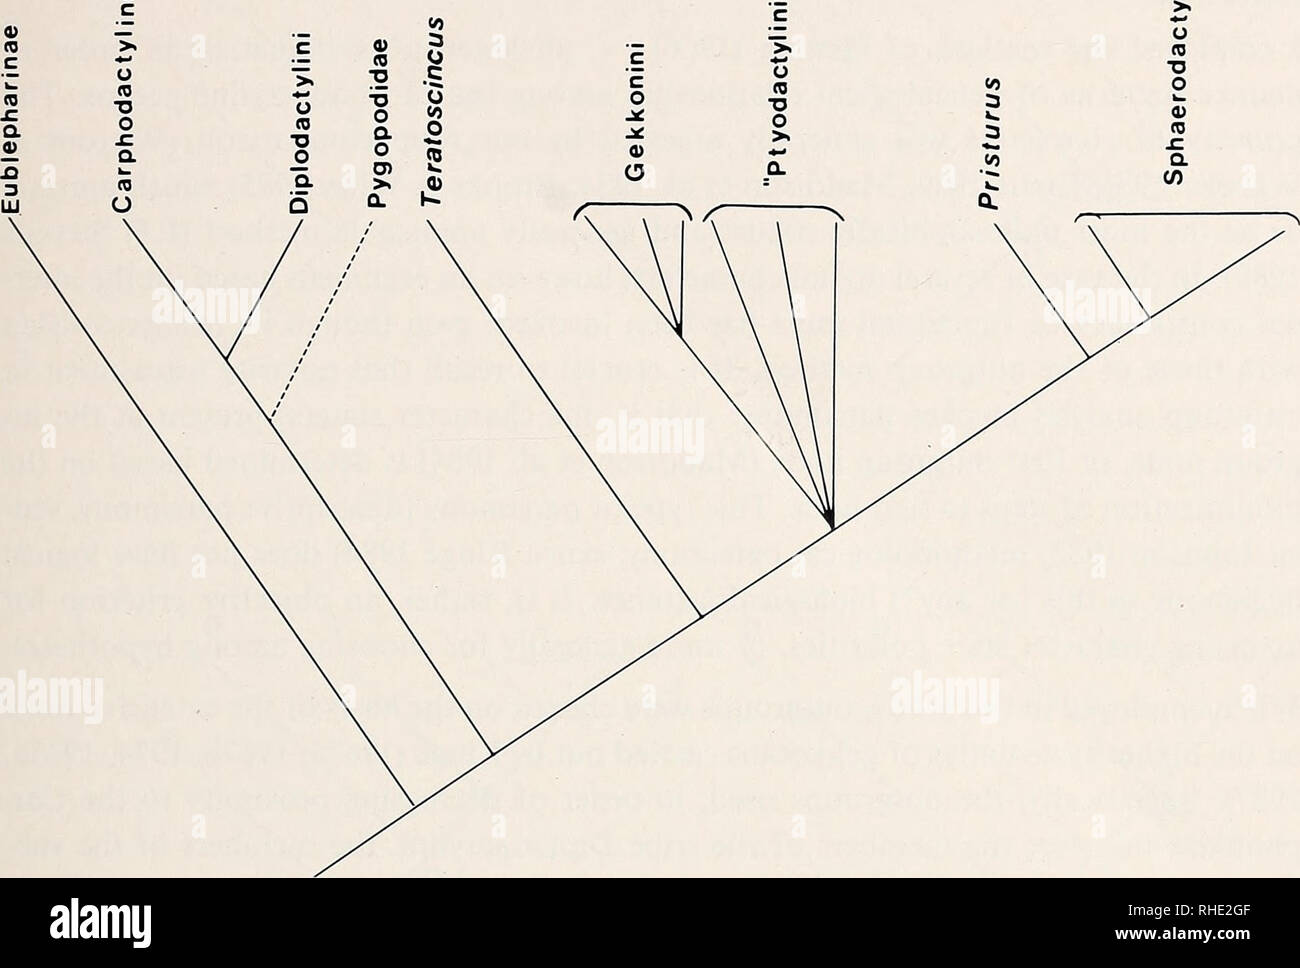 . Bonner zoologische Monographien. Zoology. 13 (0. Fig.3: Hypothesis of higher order gekkonid relationships (after Kluge 1967a, 1967b, 1987) used in this analysis for the purpose of selecting outgroups. Dashed line indicates tentative placement of the Pygopodidae. For the purposes of this study all taxa from Teratoscincus to the right of the cladogram are considered to be Gekkonine geckos. Quotation marks around the Ptyodactylini in- dicate the recognized paraphyly of this taxon. The most commonly used taxonomic group names are used although these are not necessarily isomorphic with respect to Stock Photo